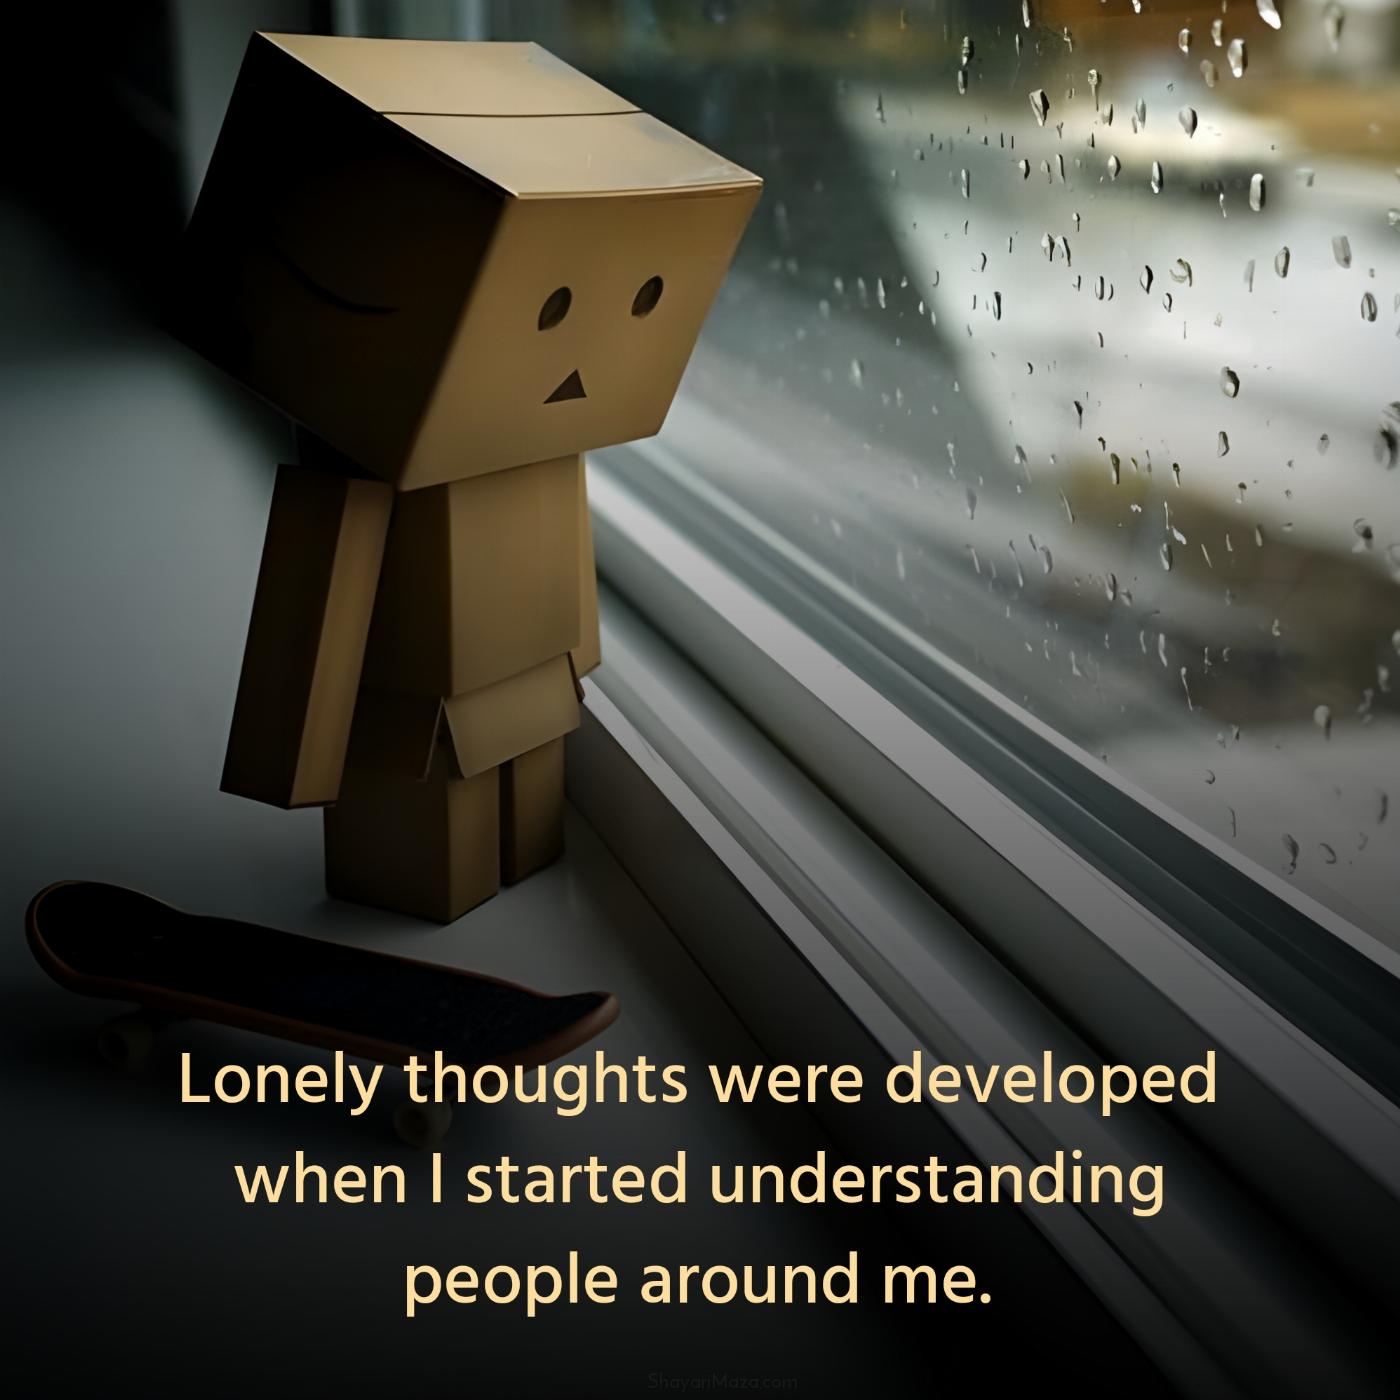 Lonely thoughts were developed when I started understanding people